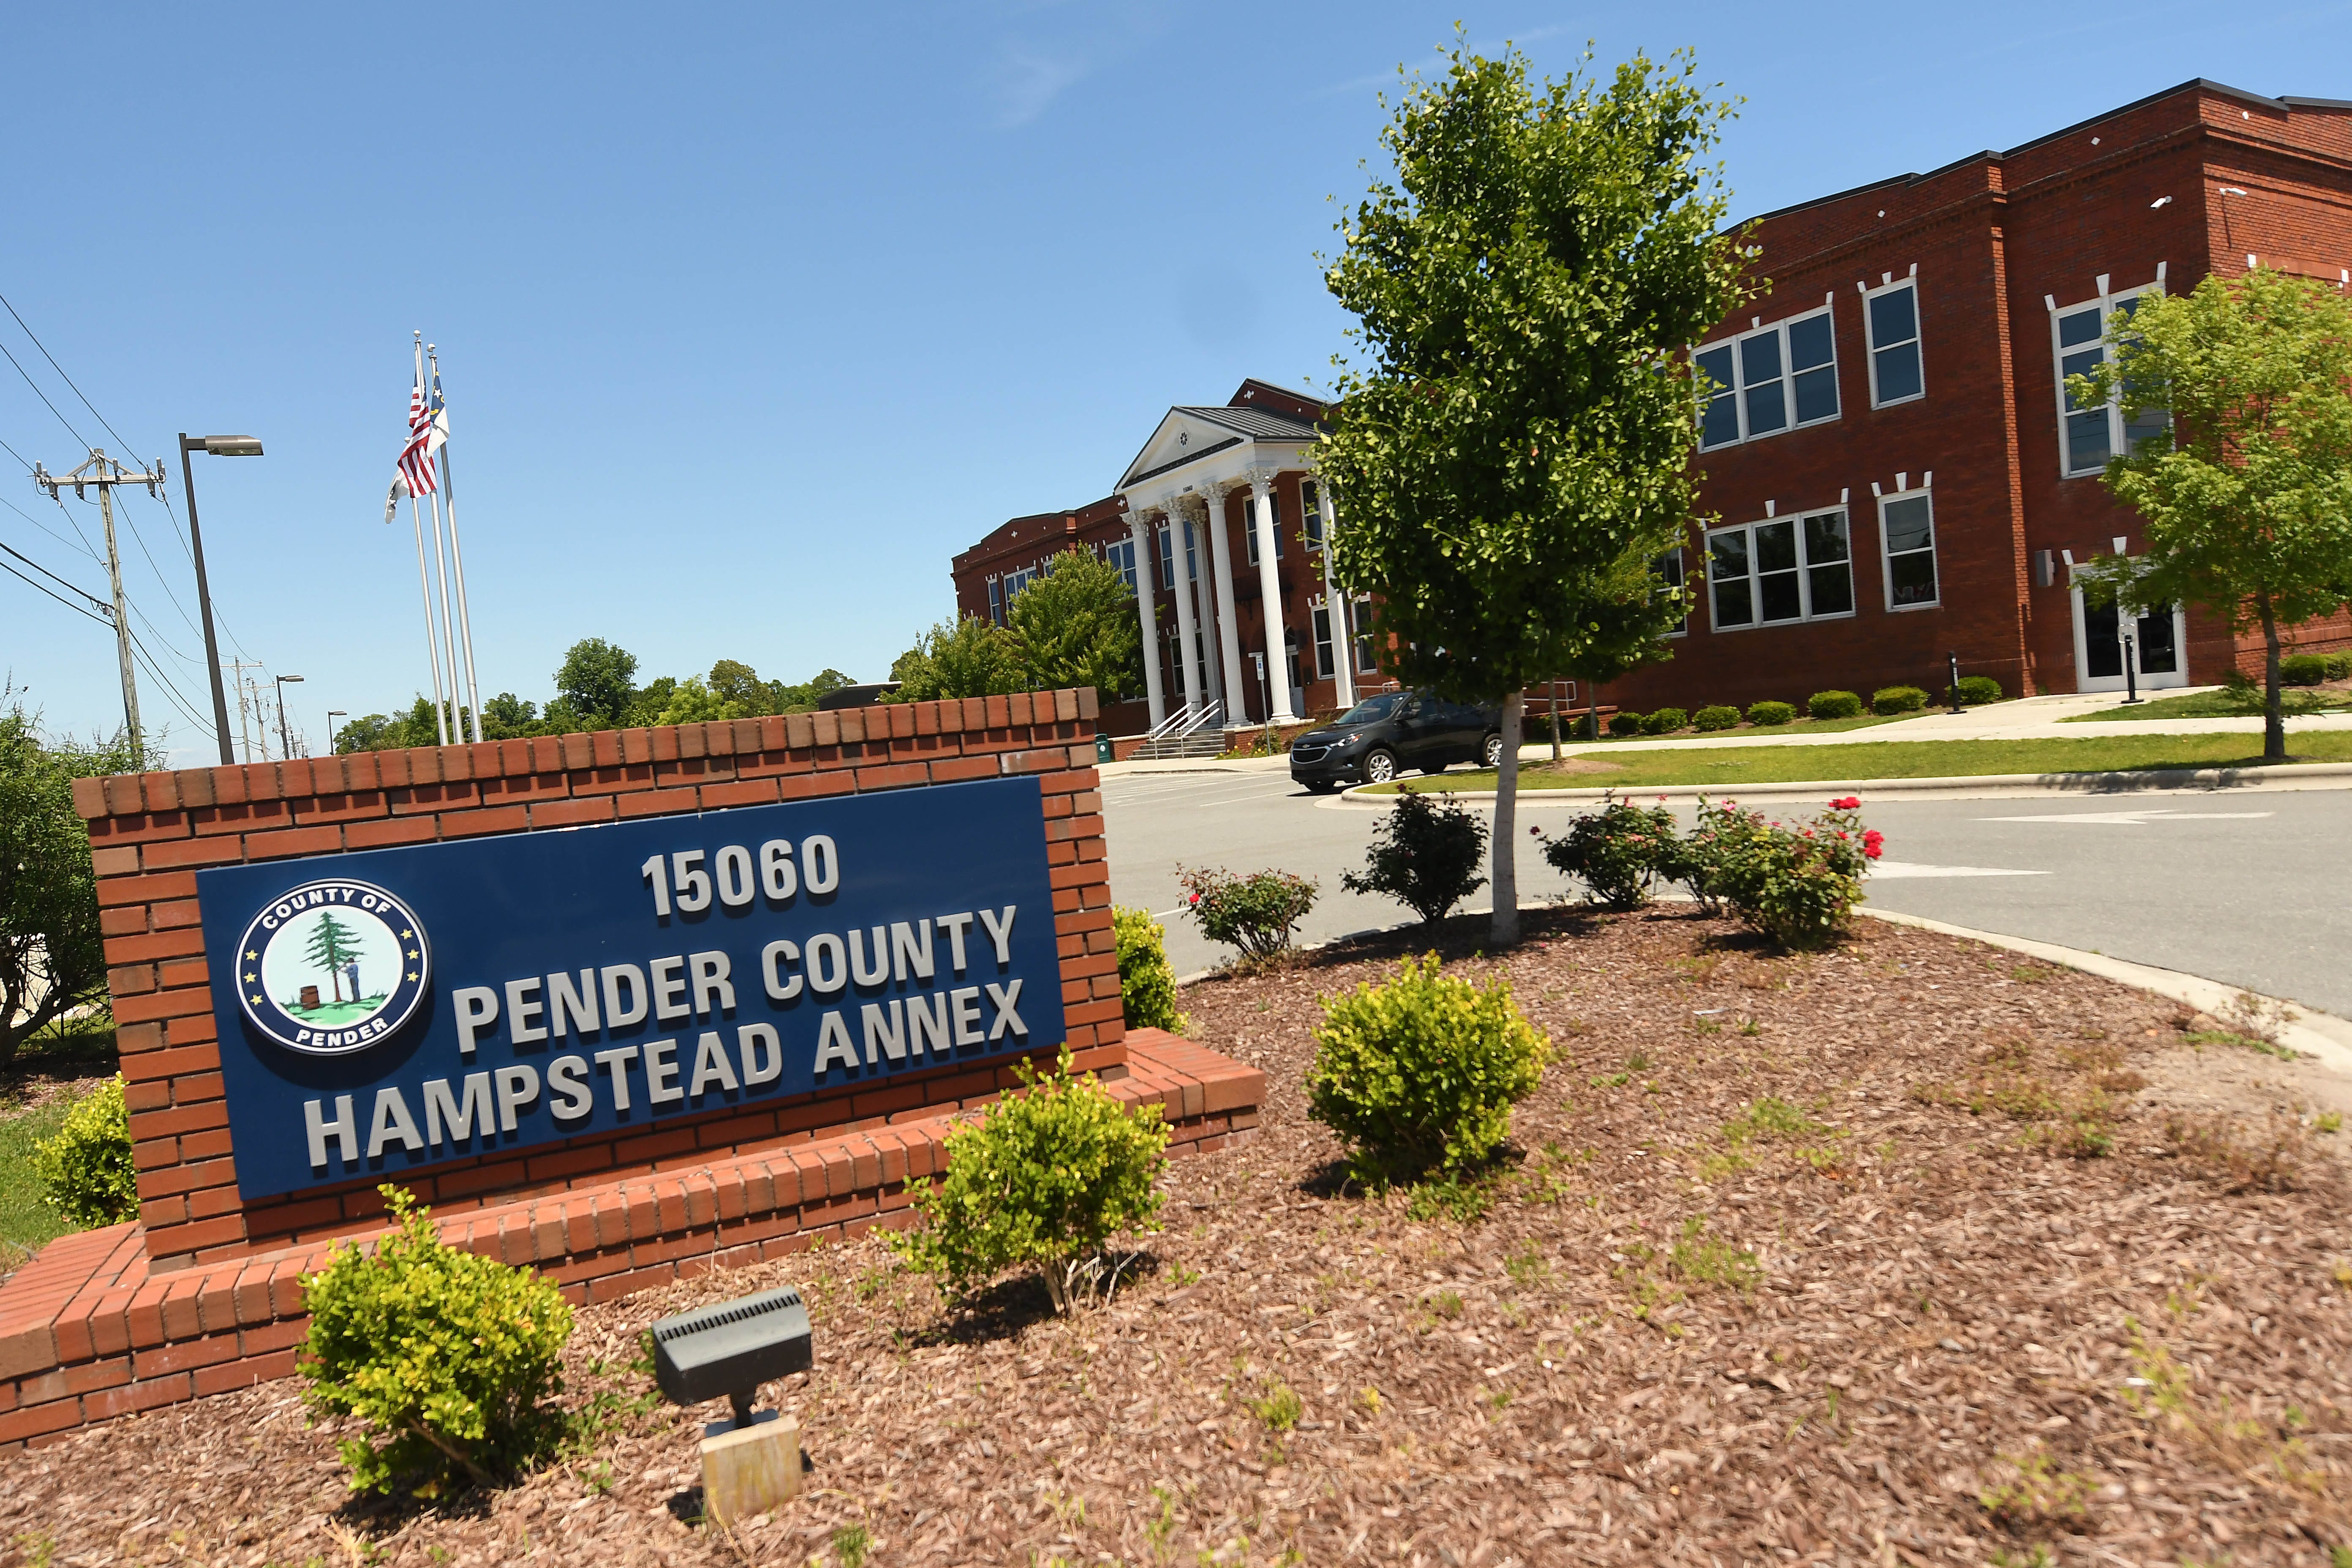 Amid Pender County growth, officials